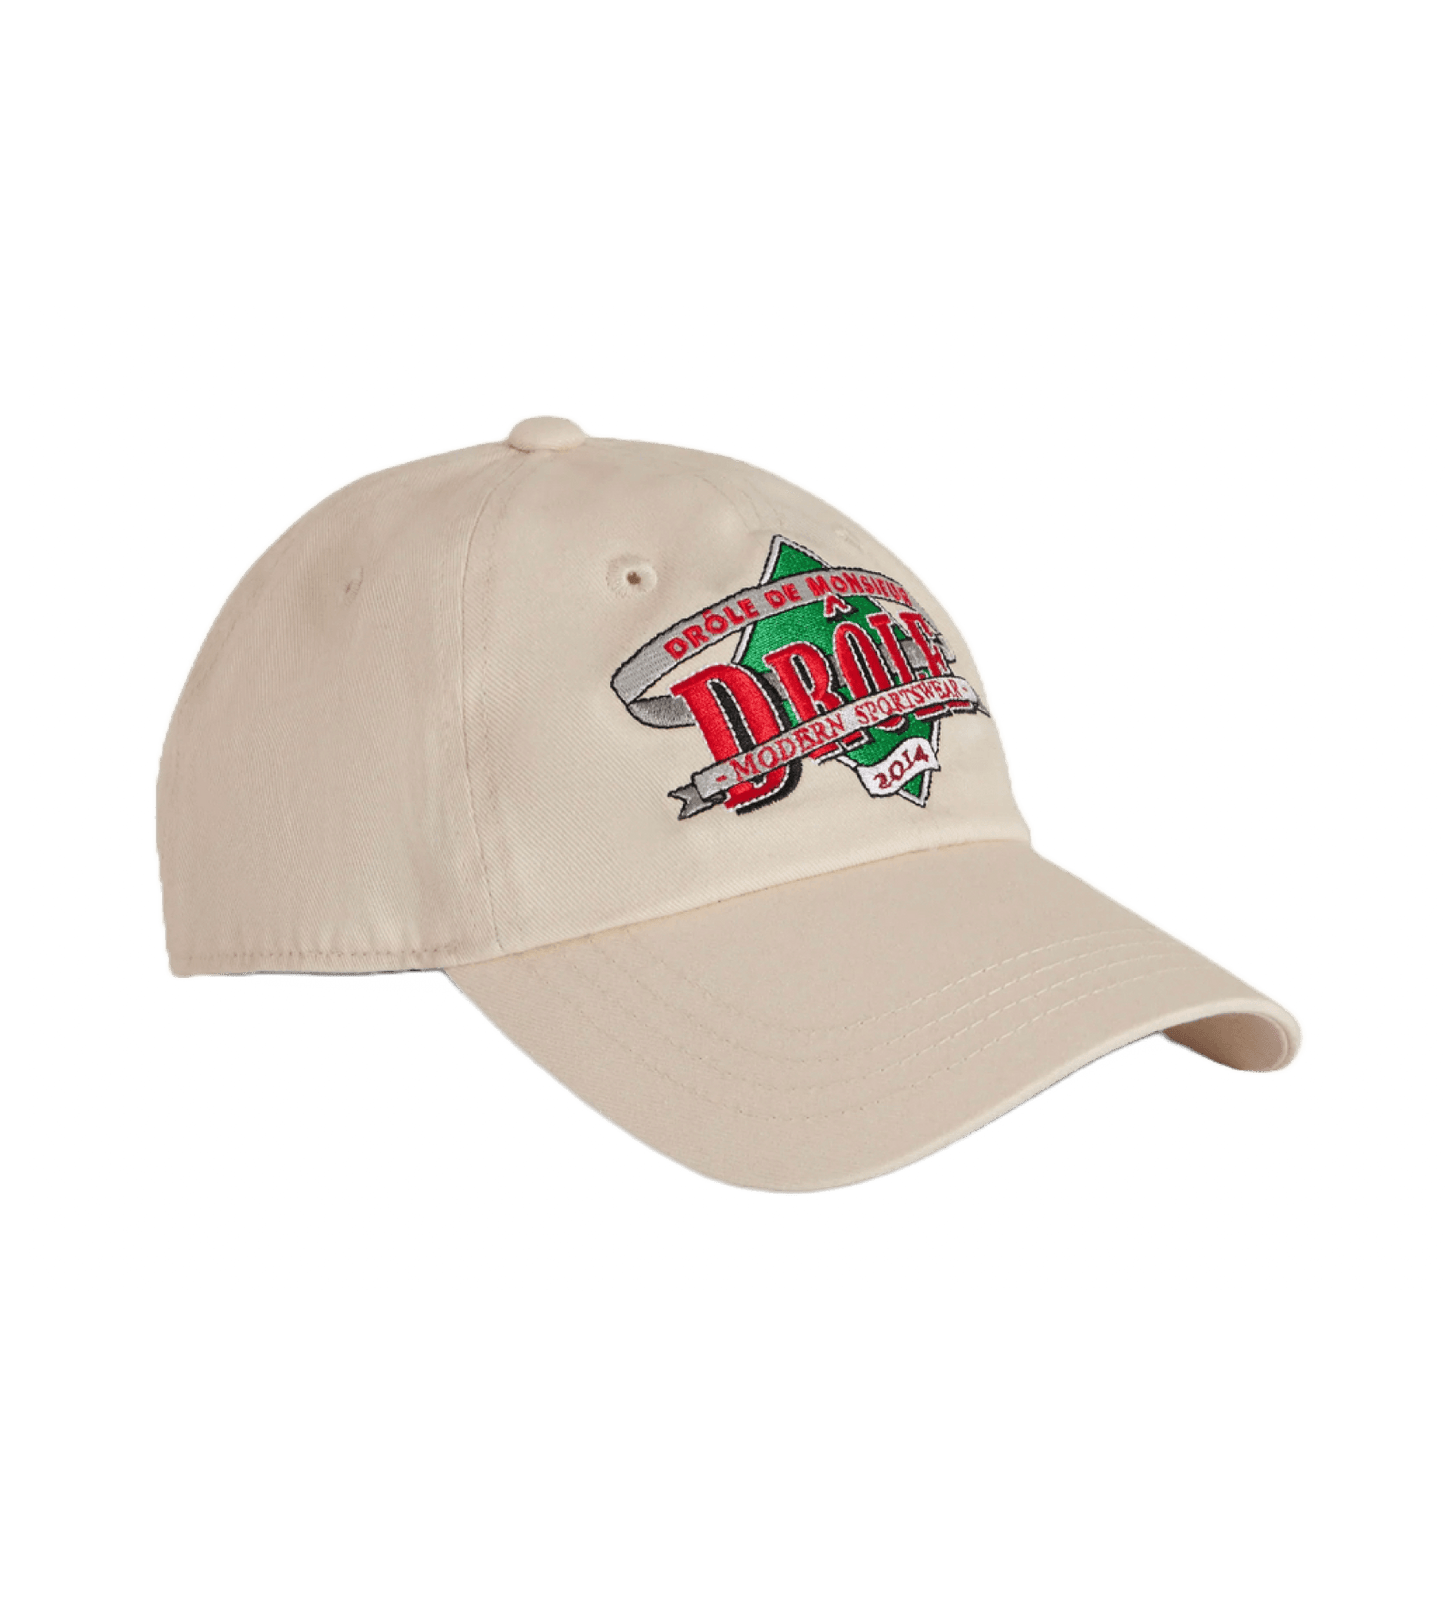 A DROLE DE MONSIEUR hat with a red and green embroidered logo on it.